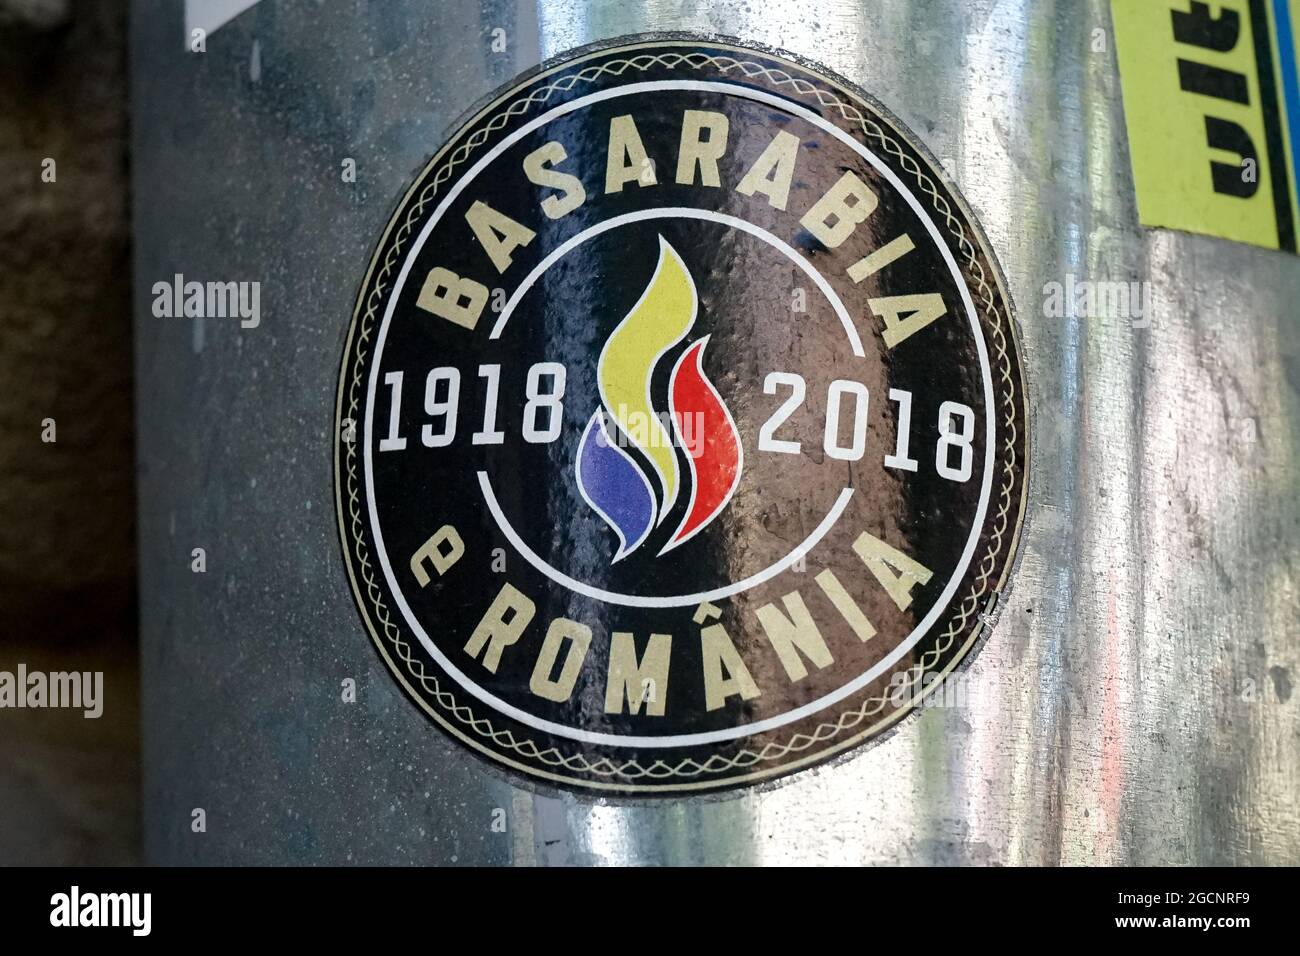 Bucharest, Romania - July 08, 2021: A sticker with the message 'Basarabia e Romania' (Basarabia is Romania), is pasted on the rainwater drain pipe of Stock Photo